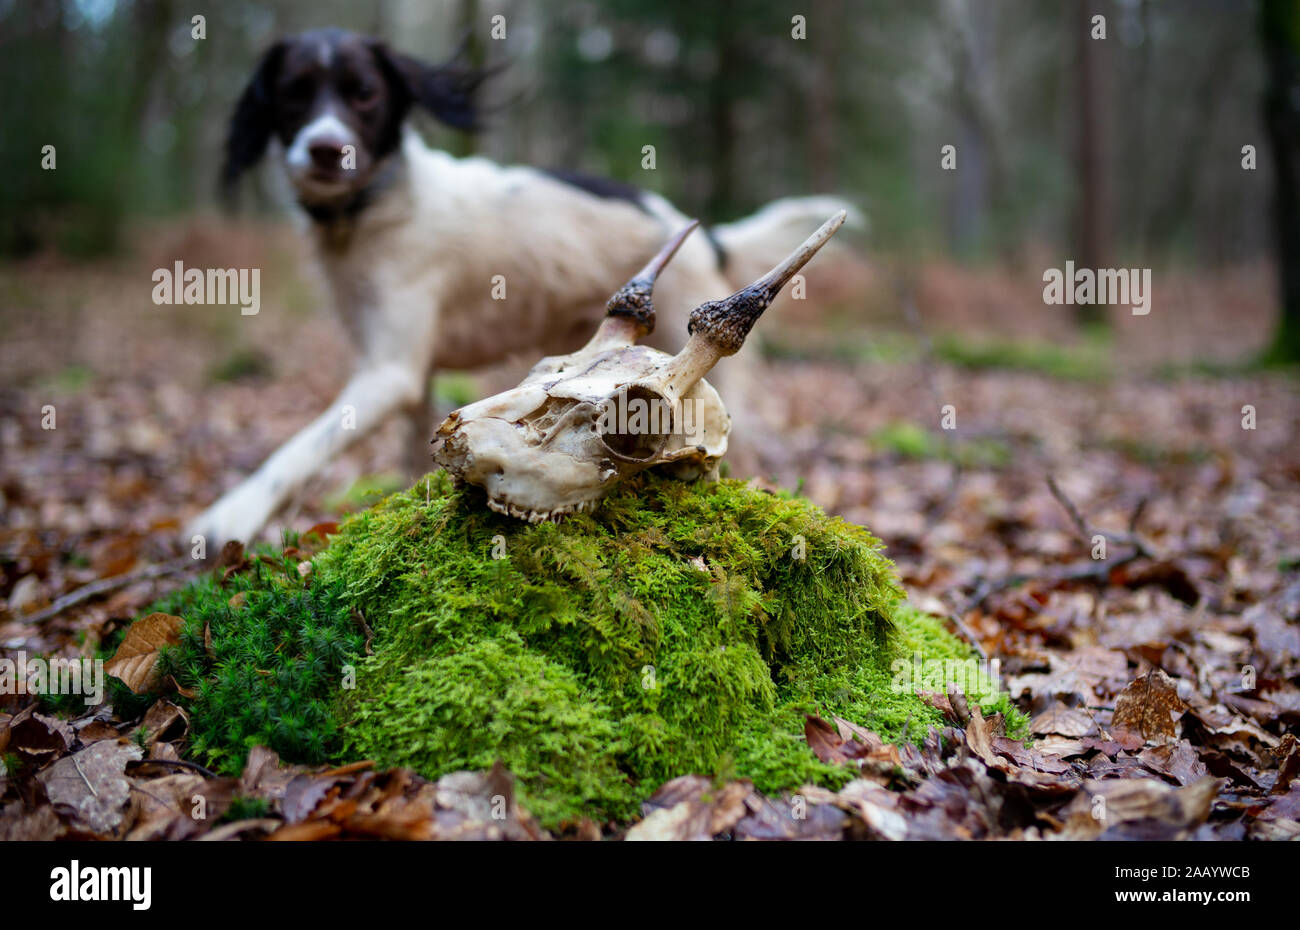 A English Springer Spaniel dog with  a deer skull complete with antlers it discovered in The New Forest Hampshire England Stock Photo